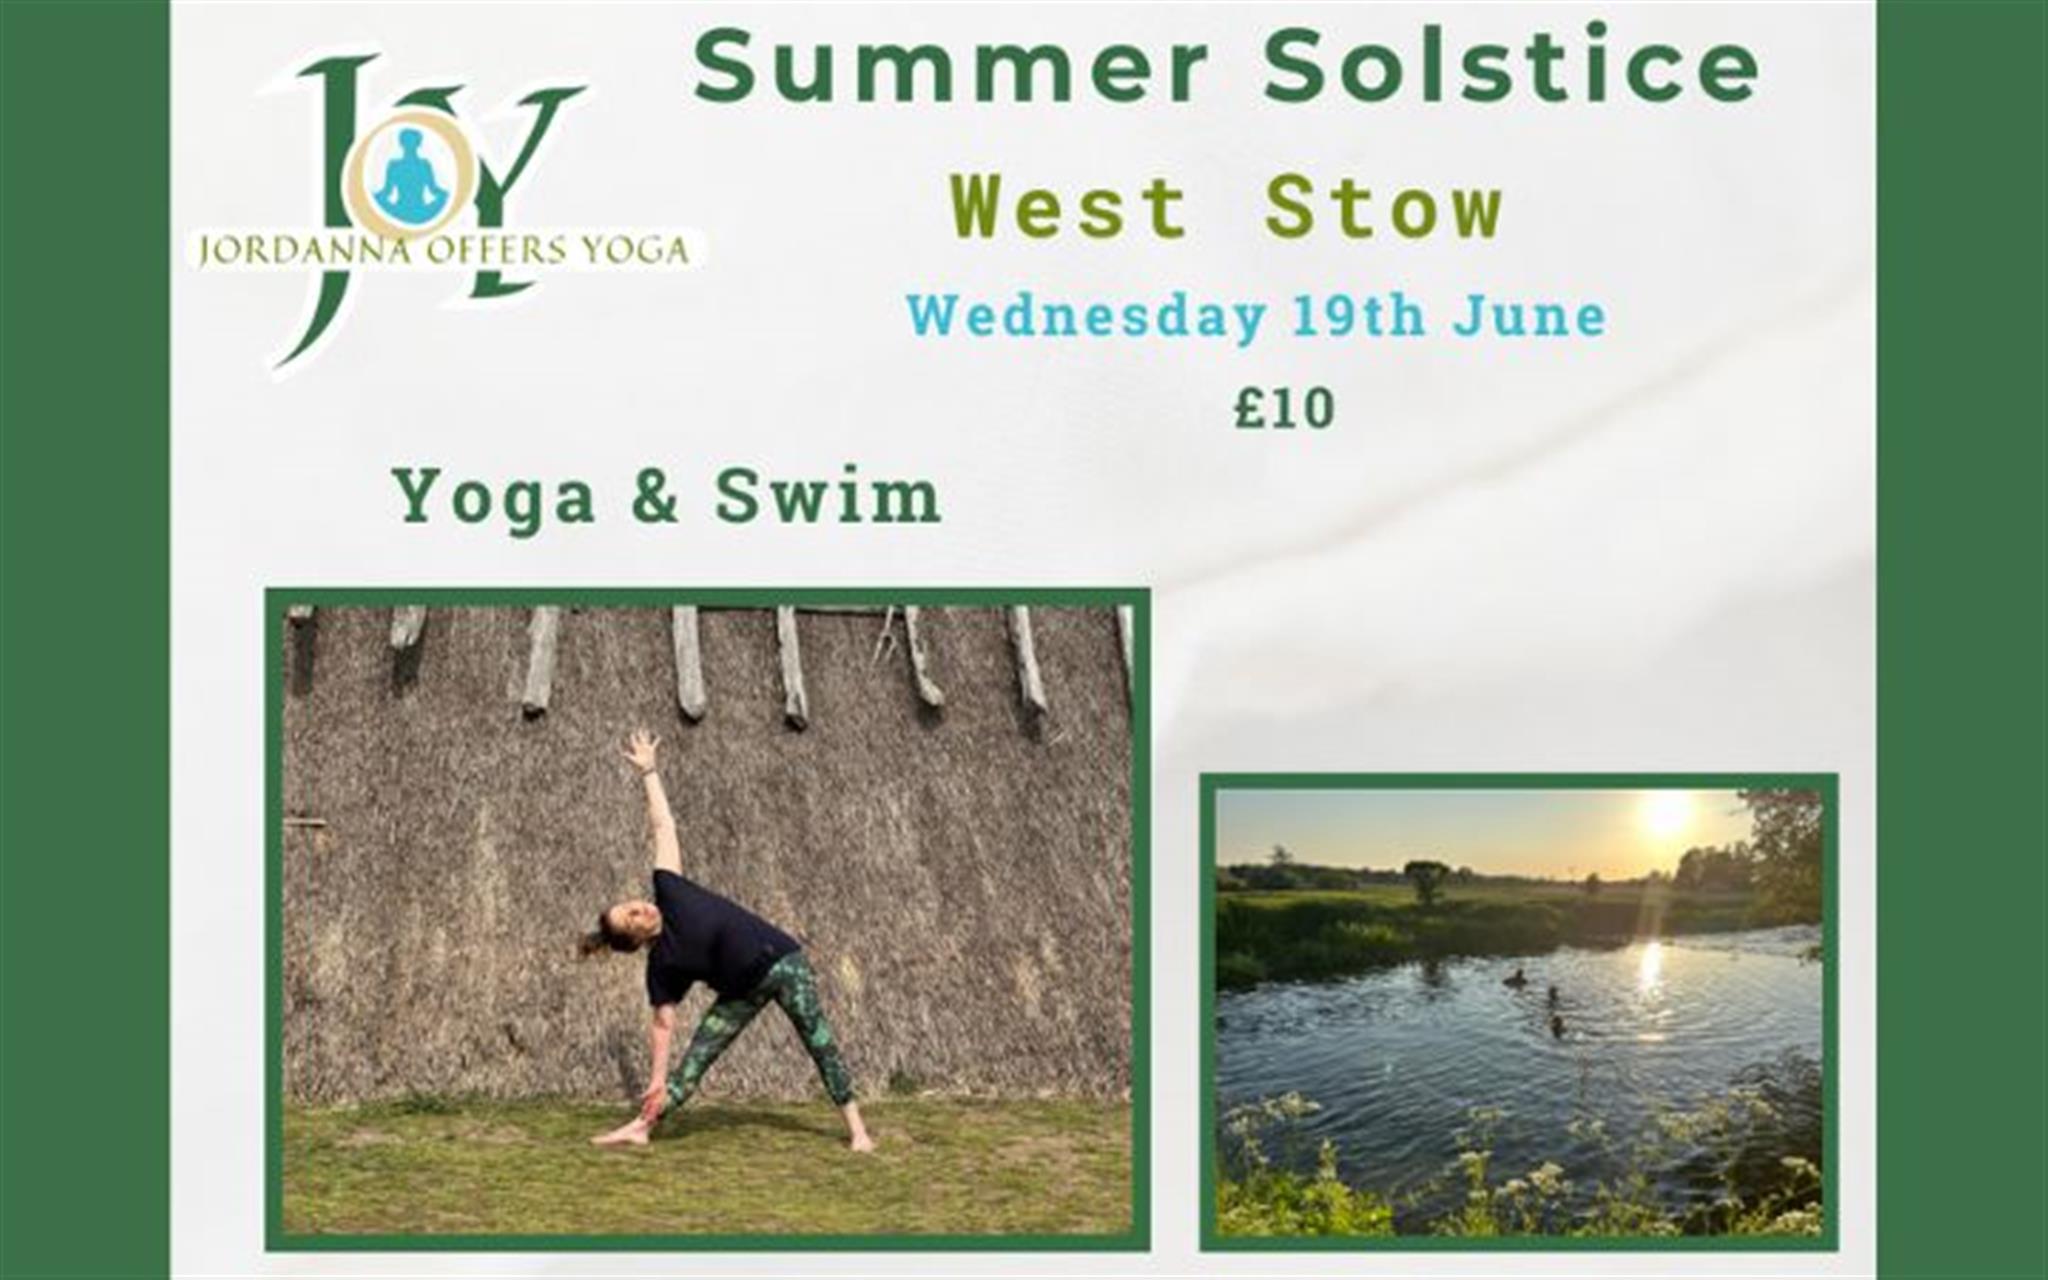 Summer Solstice Yoga at West Stow